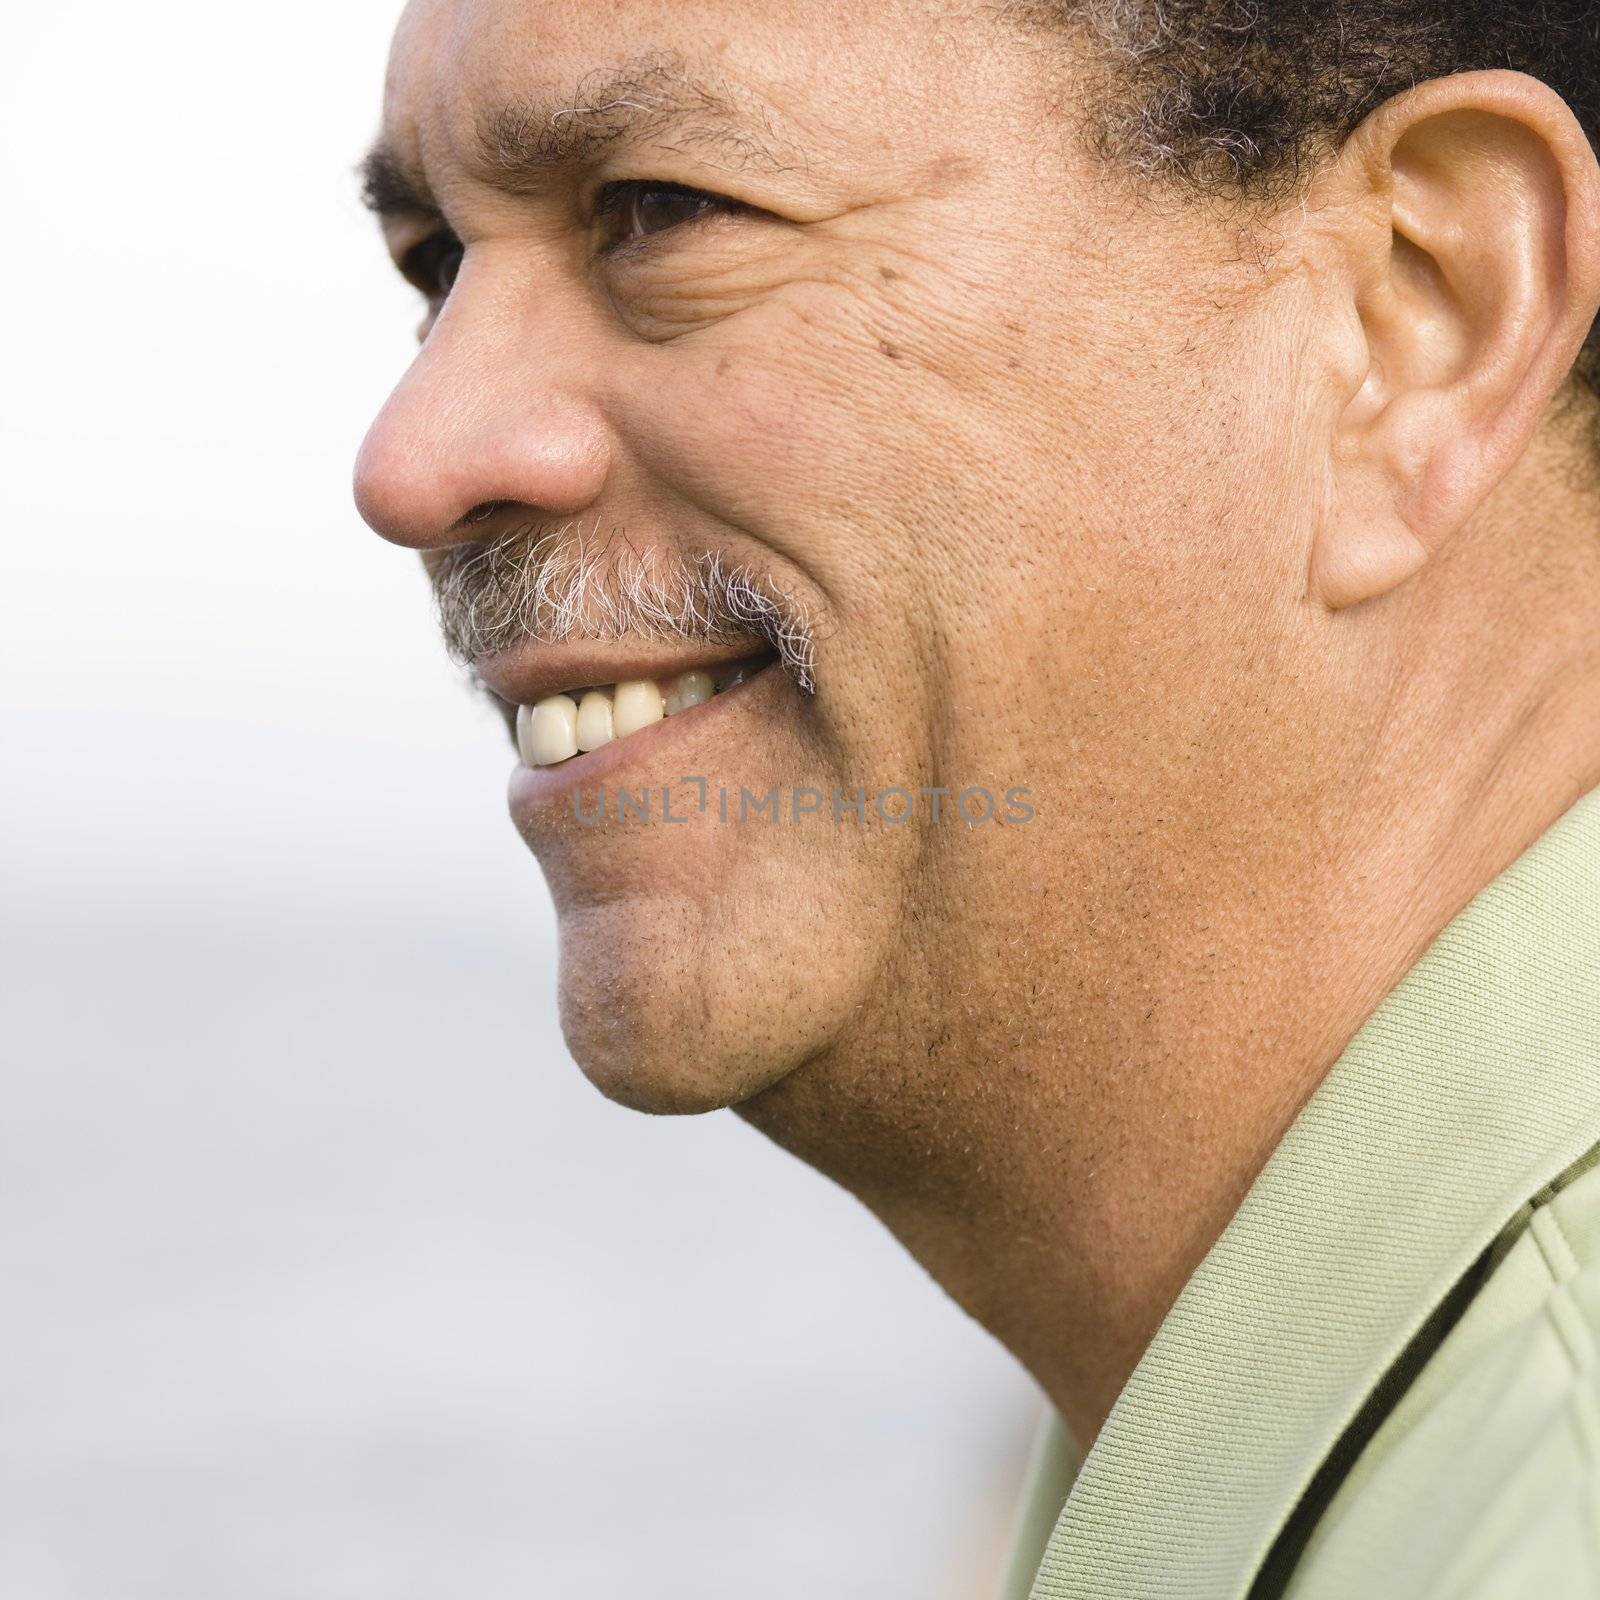 Portrait of an African American Man Outdoors